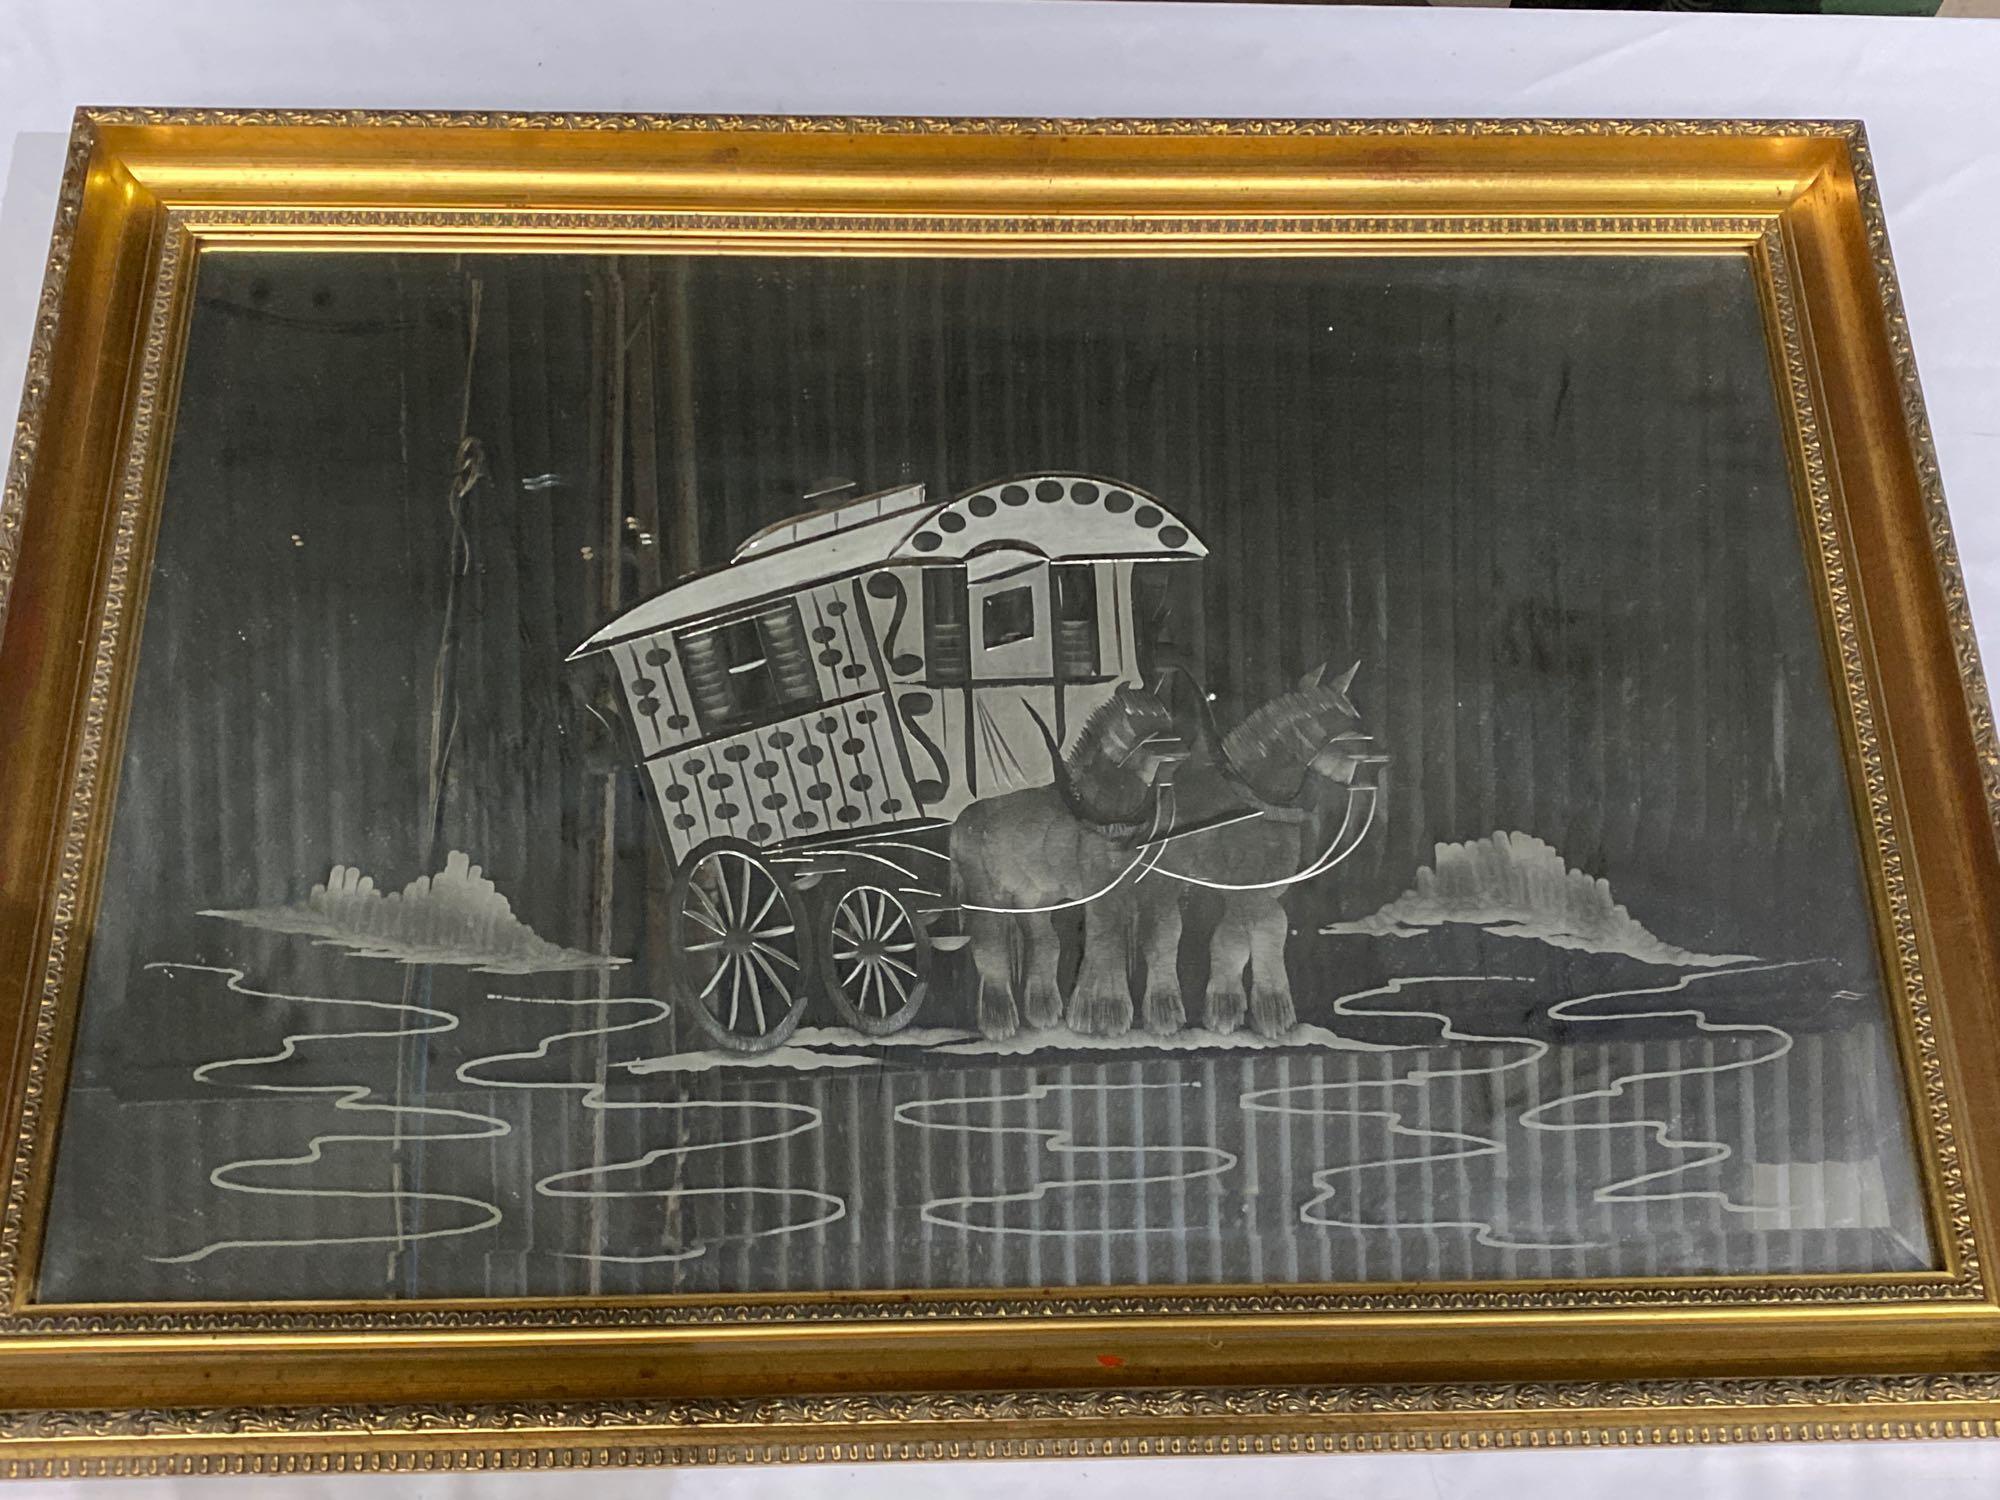 Gilt framed bevelled edge wall mirror with etched scene of a gypsy caravan being pulled by a pair